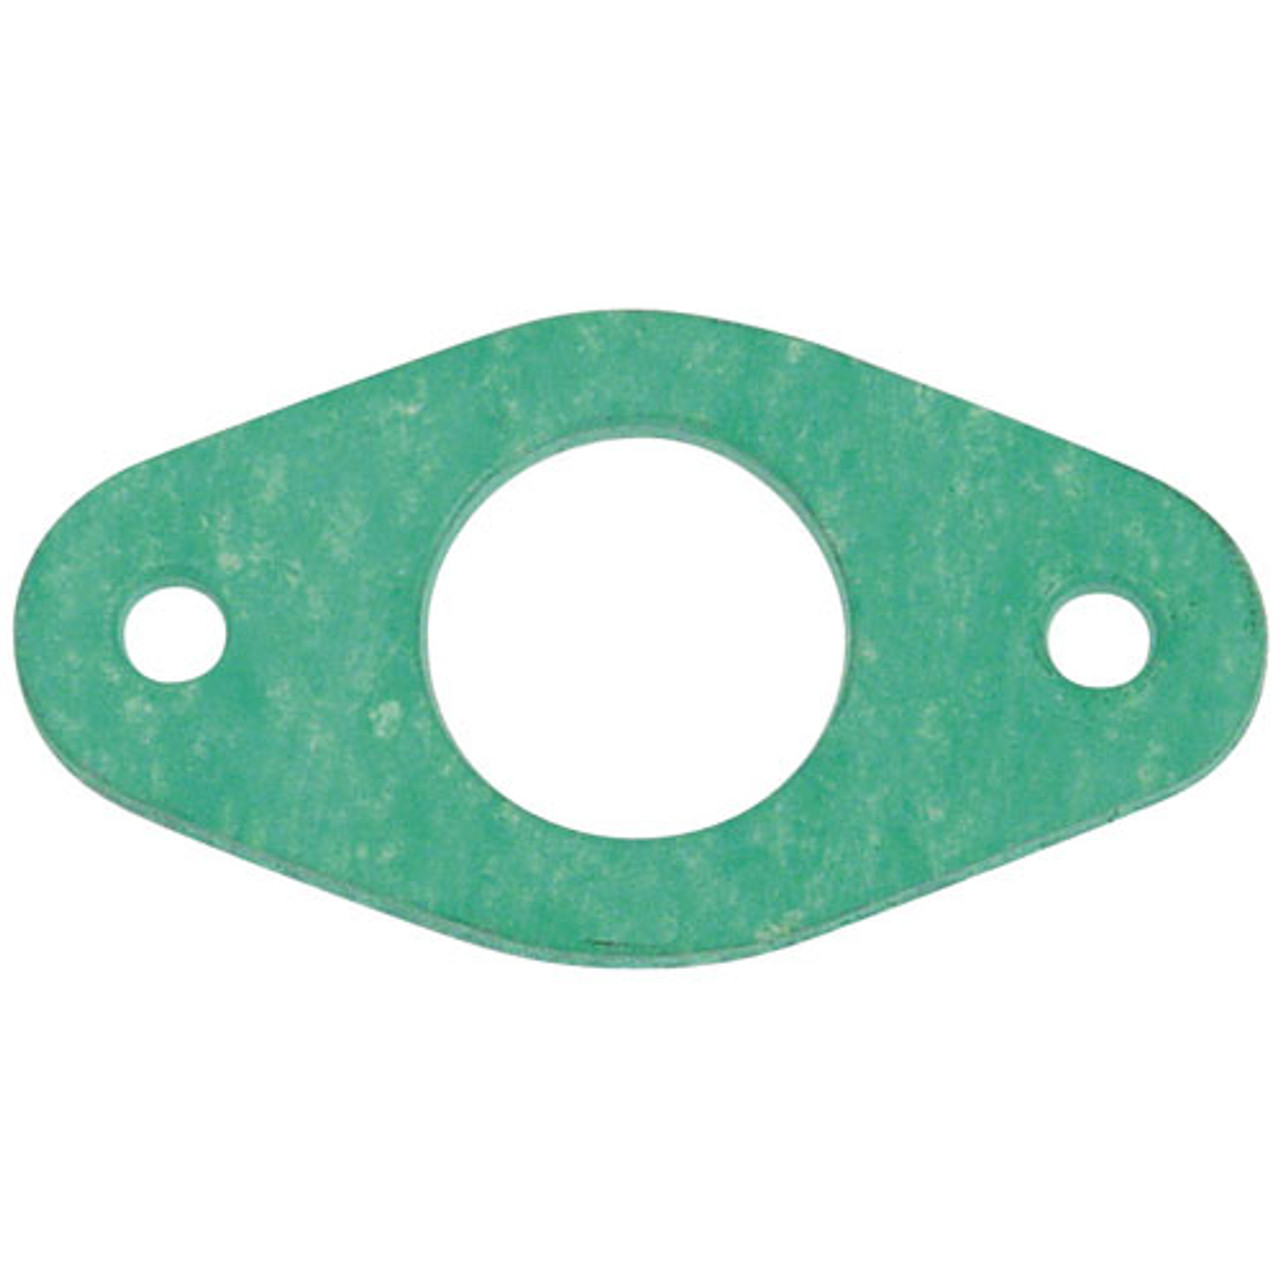 Burner Gasket 2-11/16" X 1-1/2" - Replacement Part For Rankin Delux RANRDHP-09